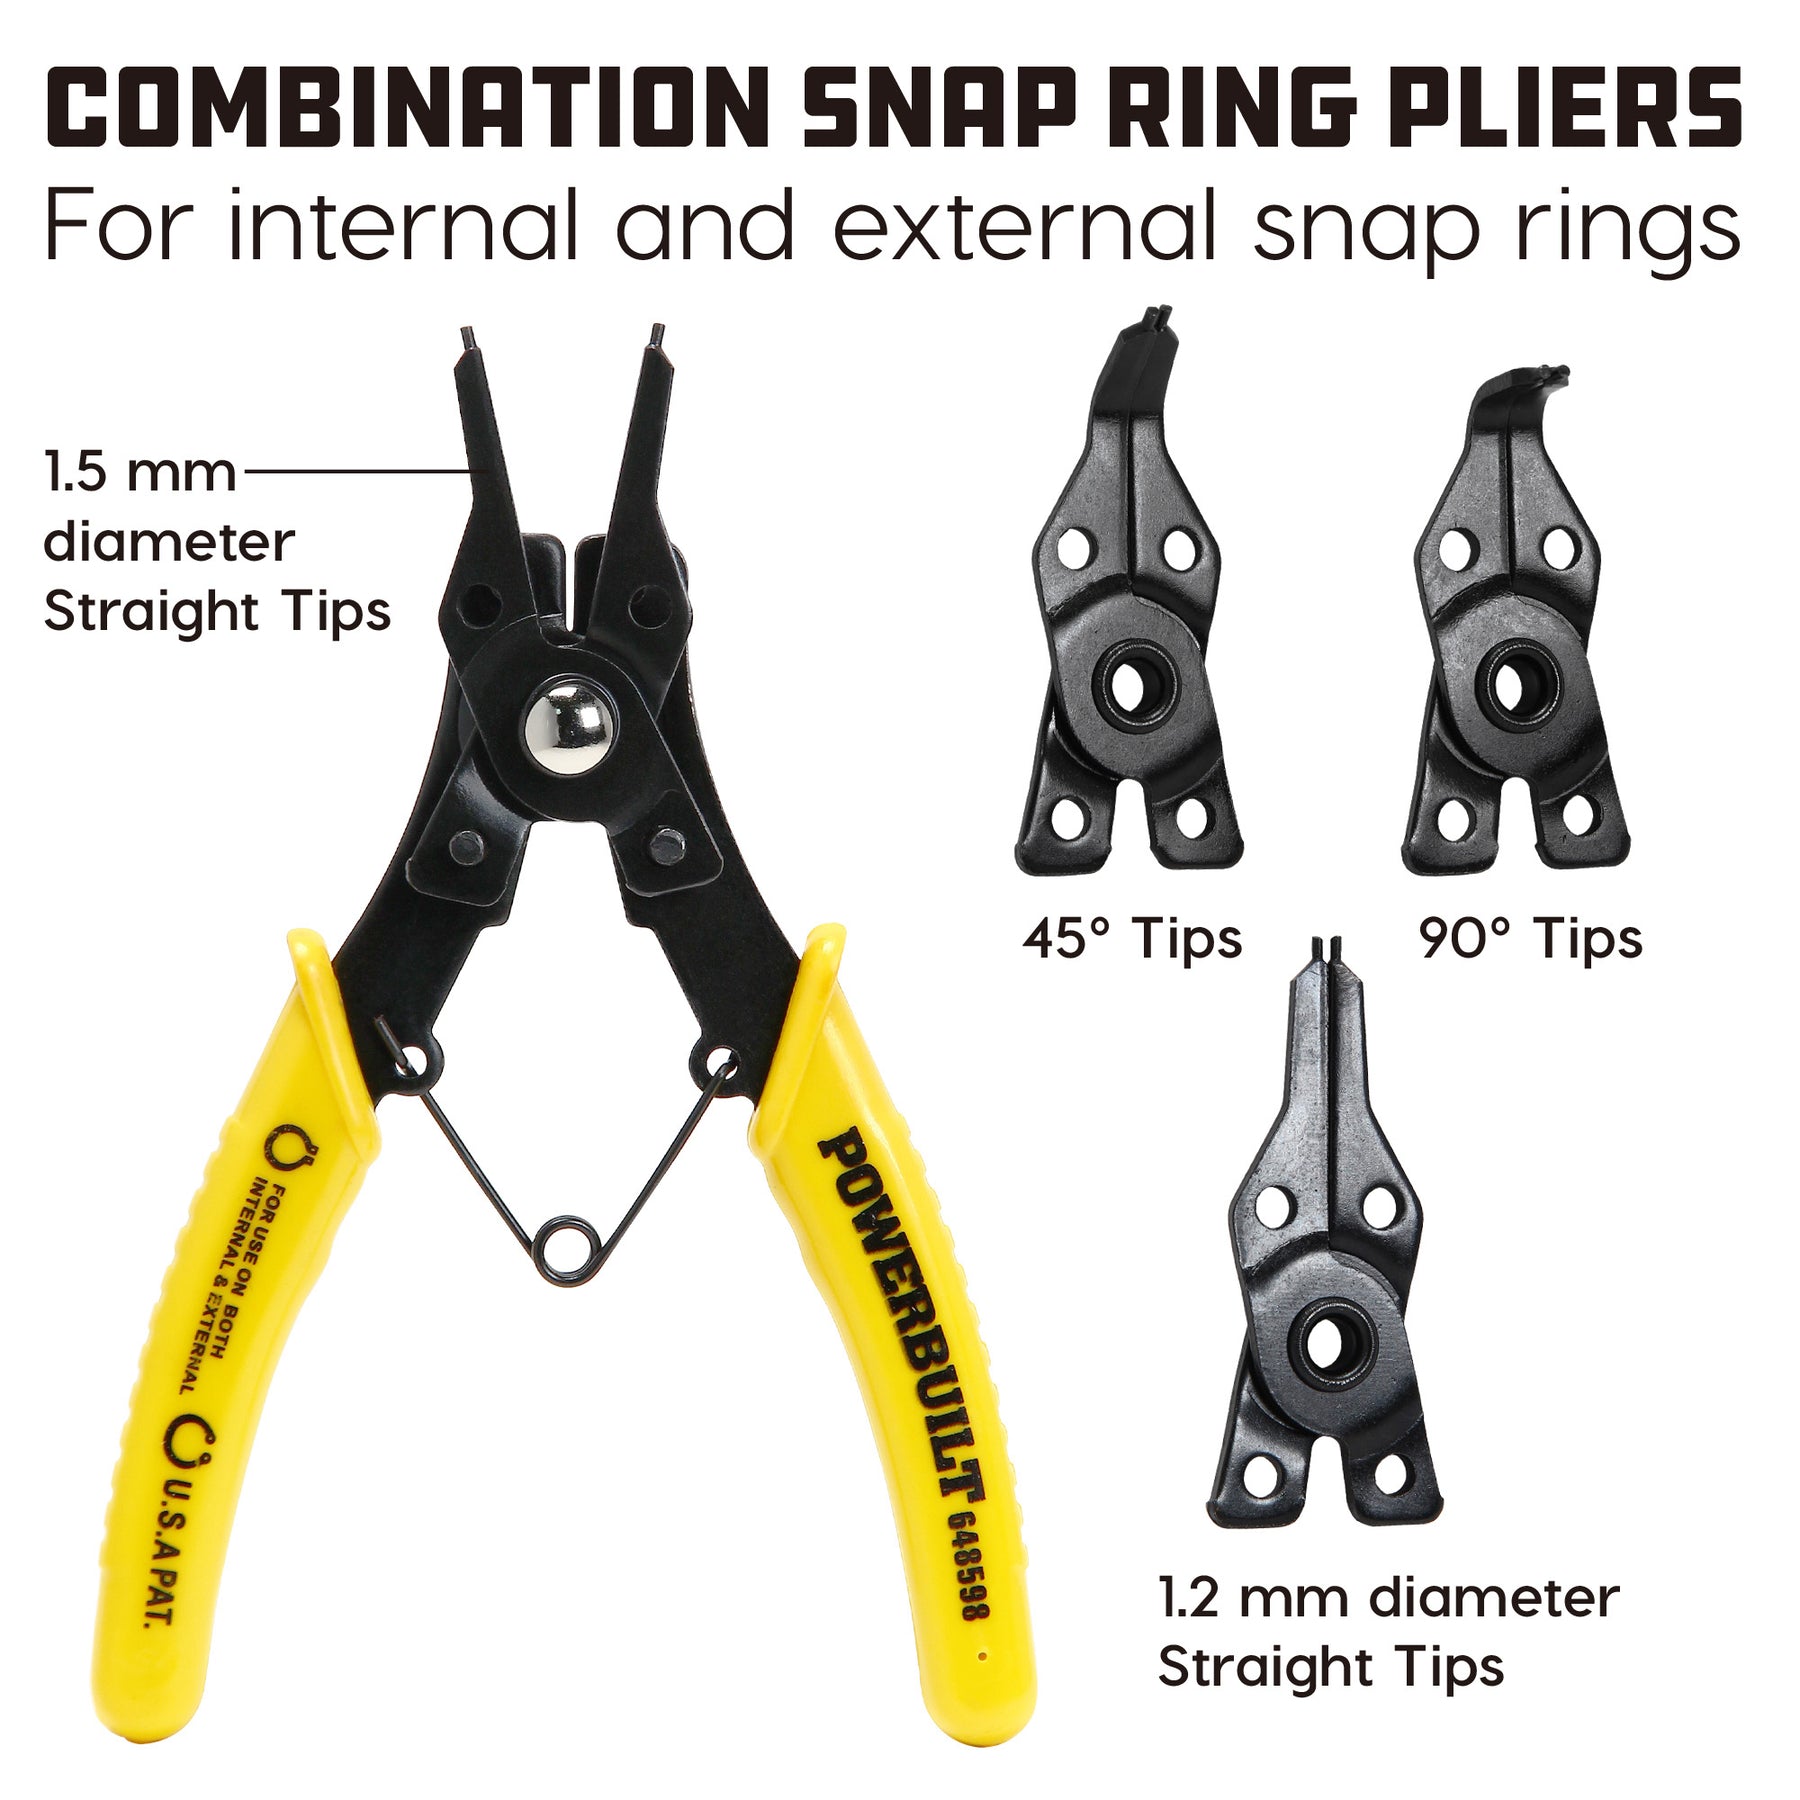 SNAP RING PLIERS PROFERRED INTERNAL/EXTERNAL SNAP RING PLIERS WITH QUICK  SWITCH TIPS - | Integratech Distribution